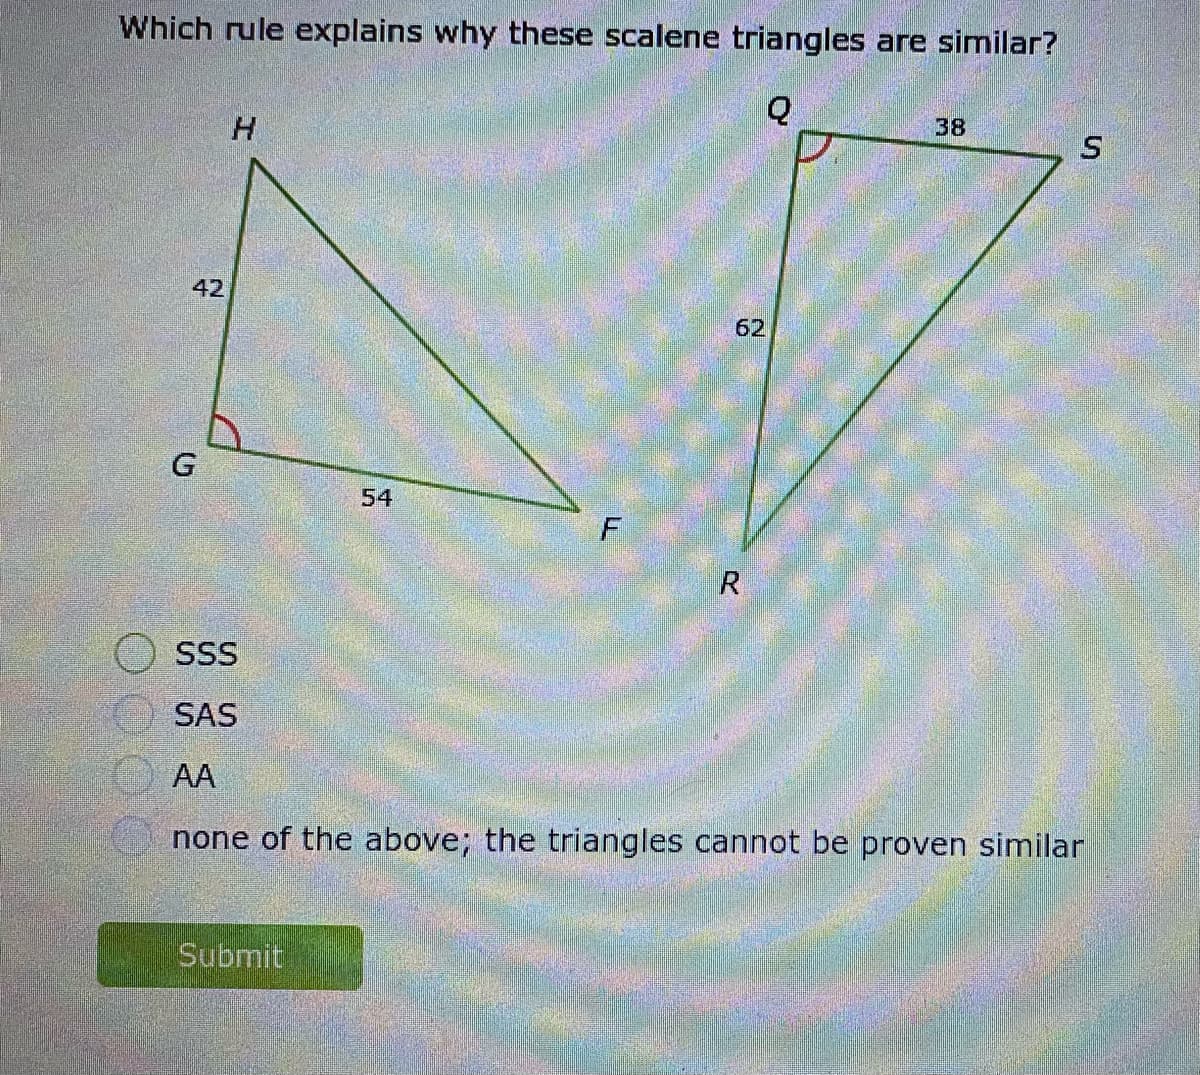 Which rule explains why these scalene triangles are similar?
38
42
62
G
54
SSS
SAS
AA
none of the above; the triangles cannot be proven similar
Submit
